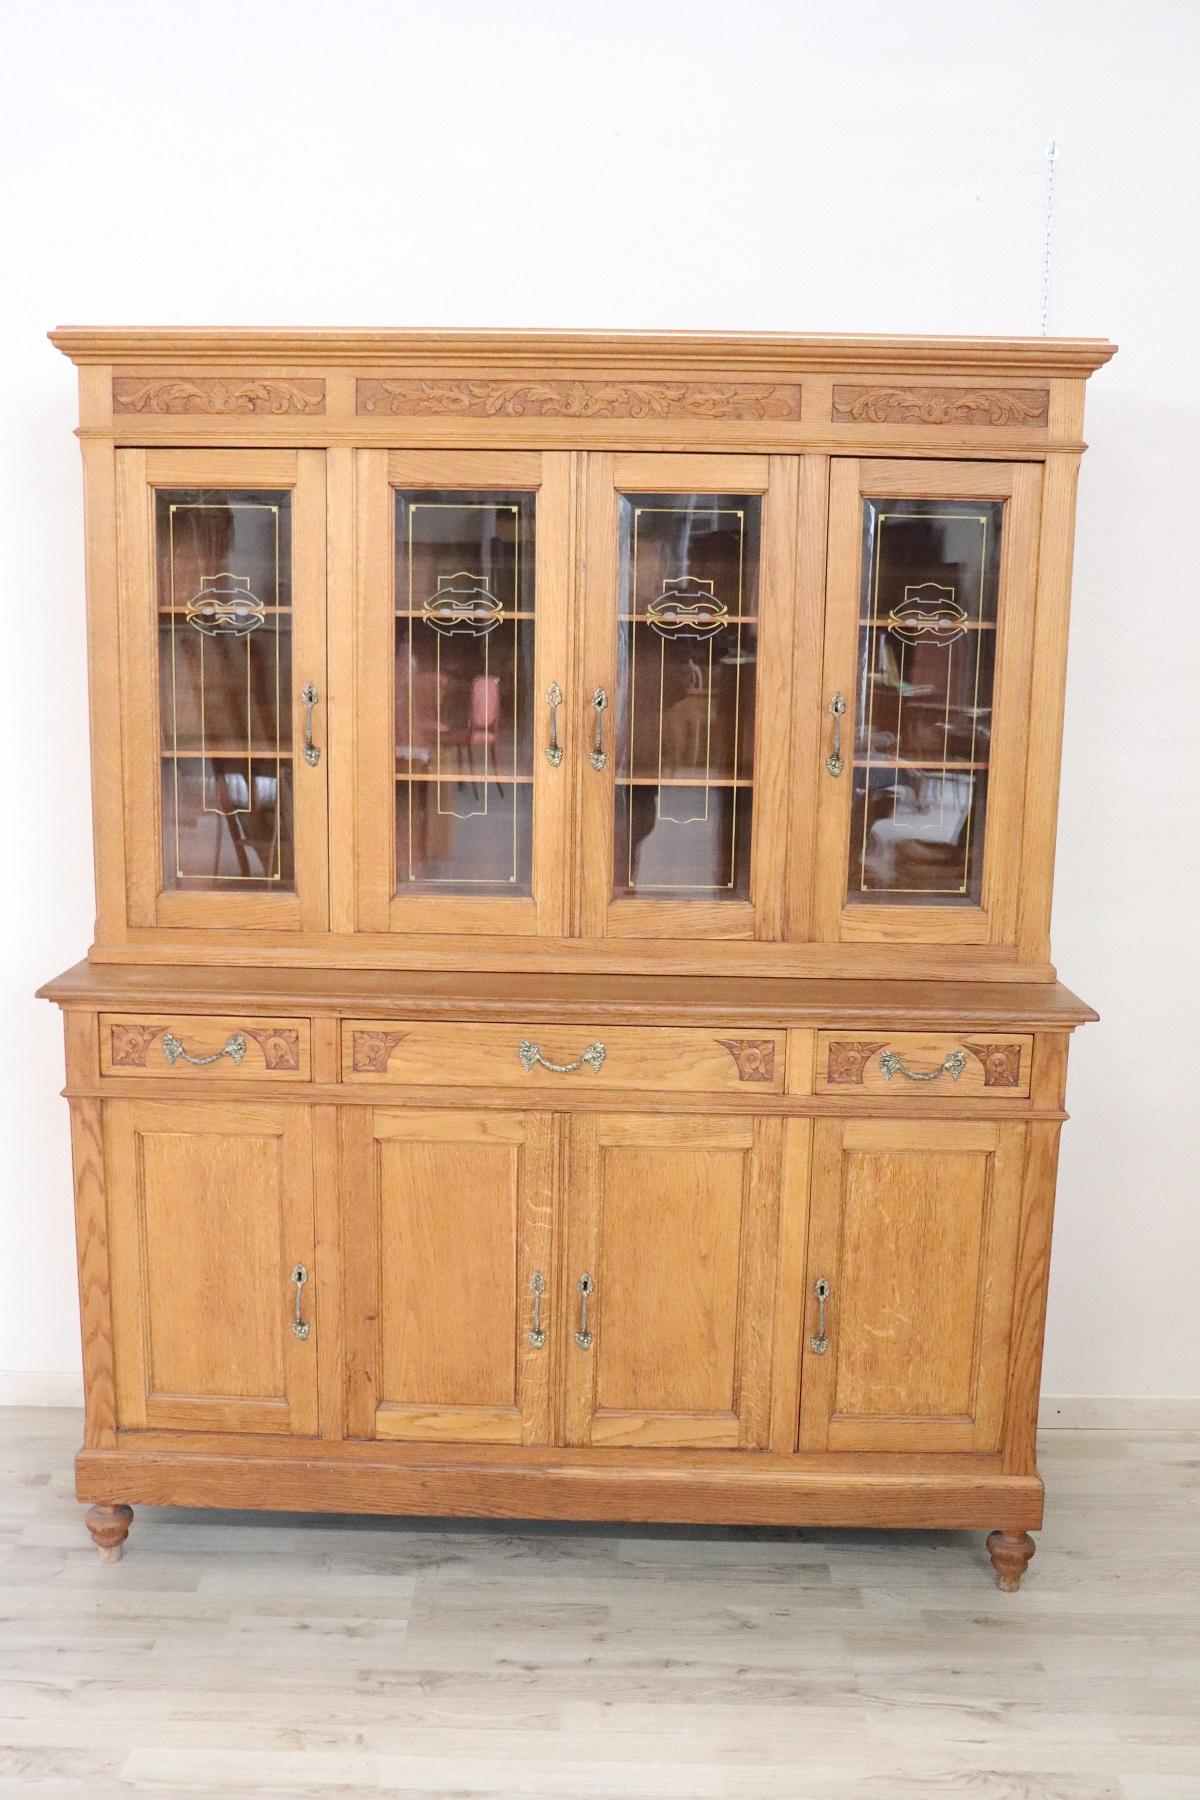 Rare antique 20th century Italian Art Nouveau dining room set 8 pieces:
An sideboard with vitrine
An extendable table
Six chairs

Beautiful dining room complete Italian chestnut solid wood very robust and durable. A beautiful sideboard in the